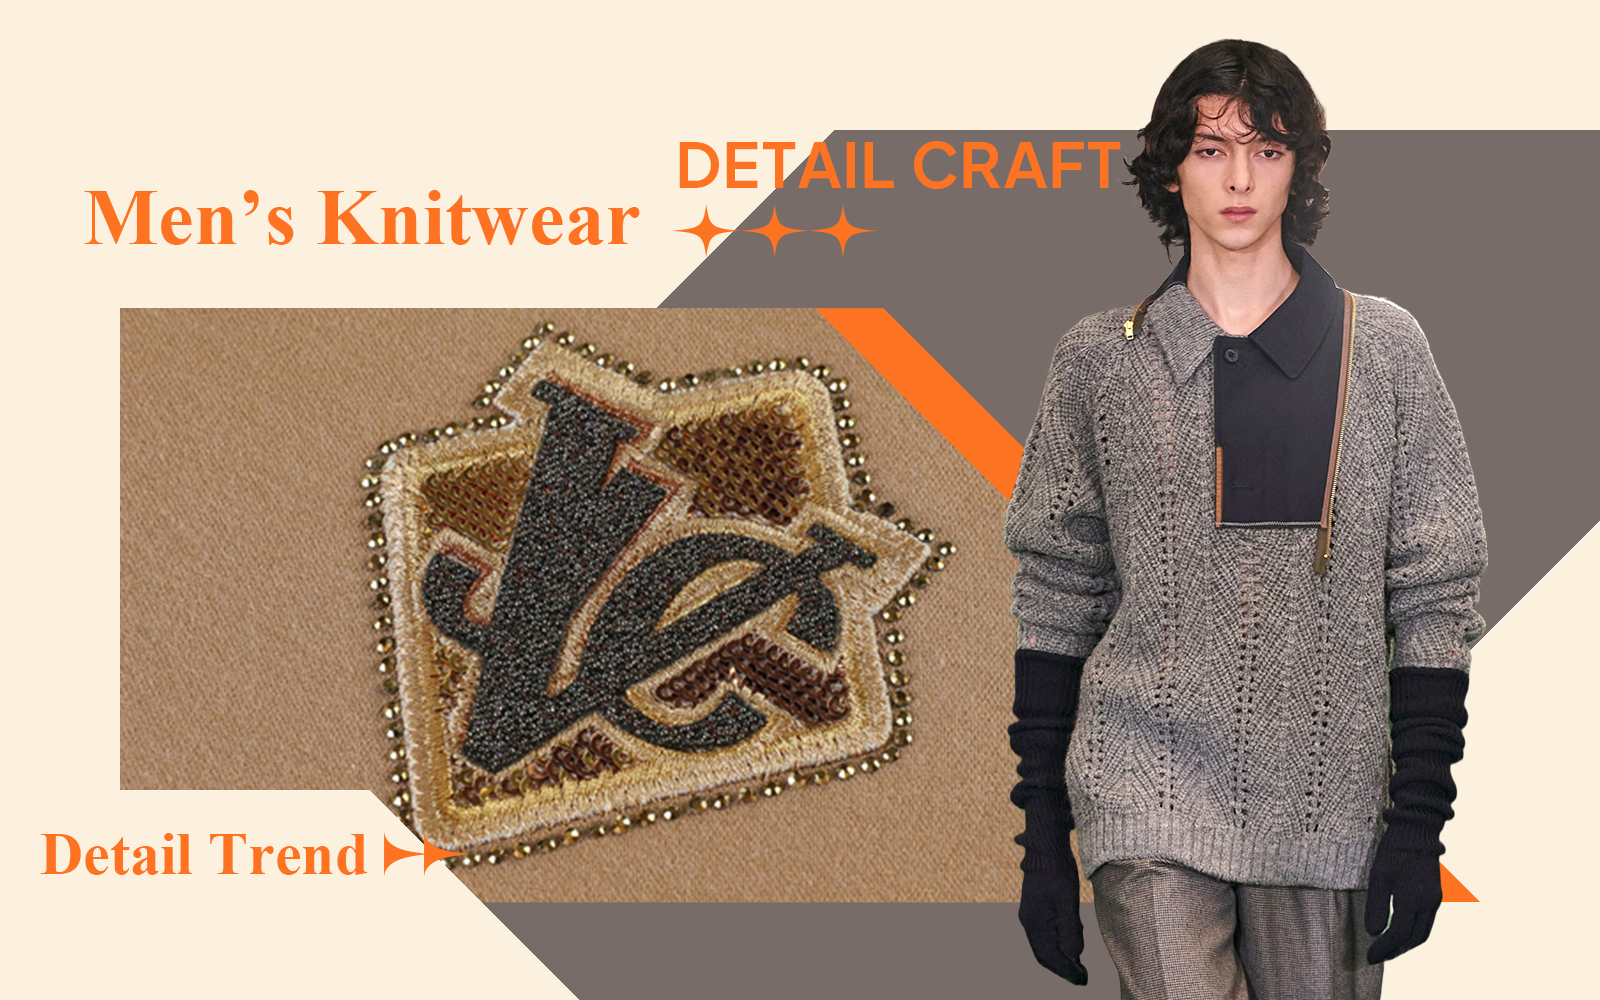 Fine Accents -- The Detail & Craft Trend for Men's Knitwear